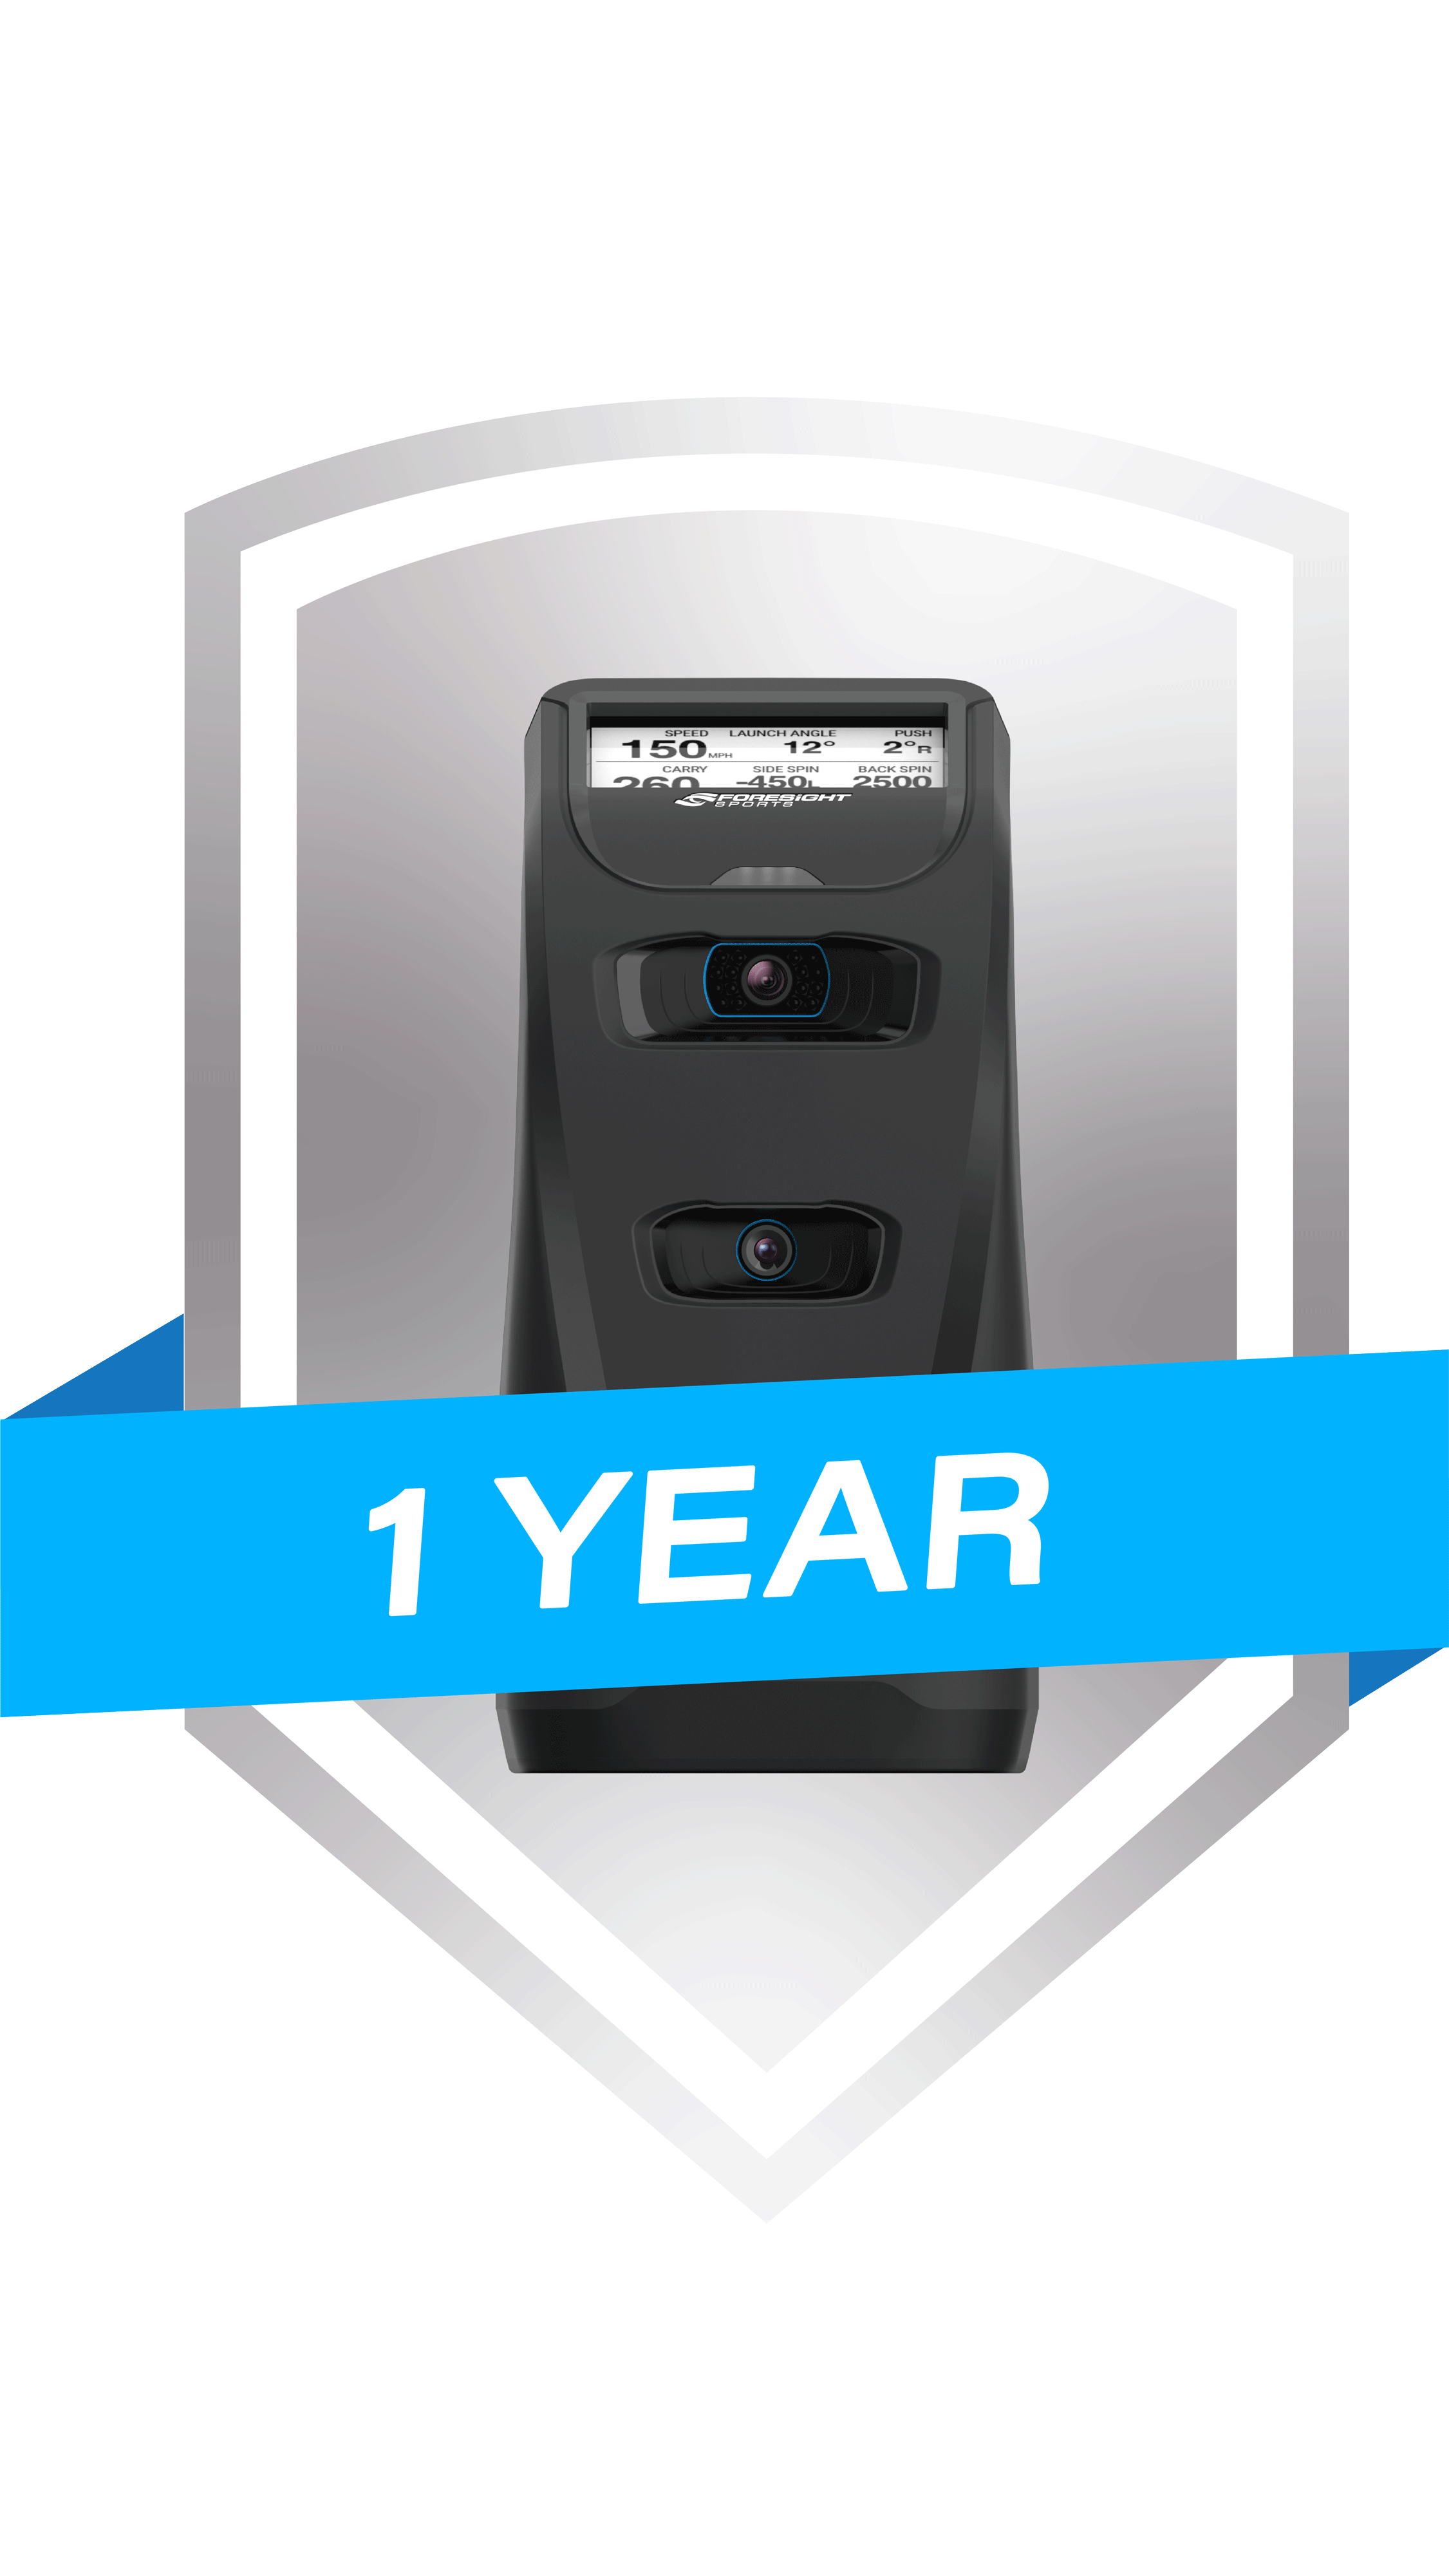 GC3 Extended Warranty - 1 Year